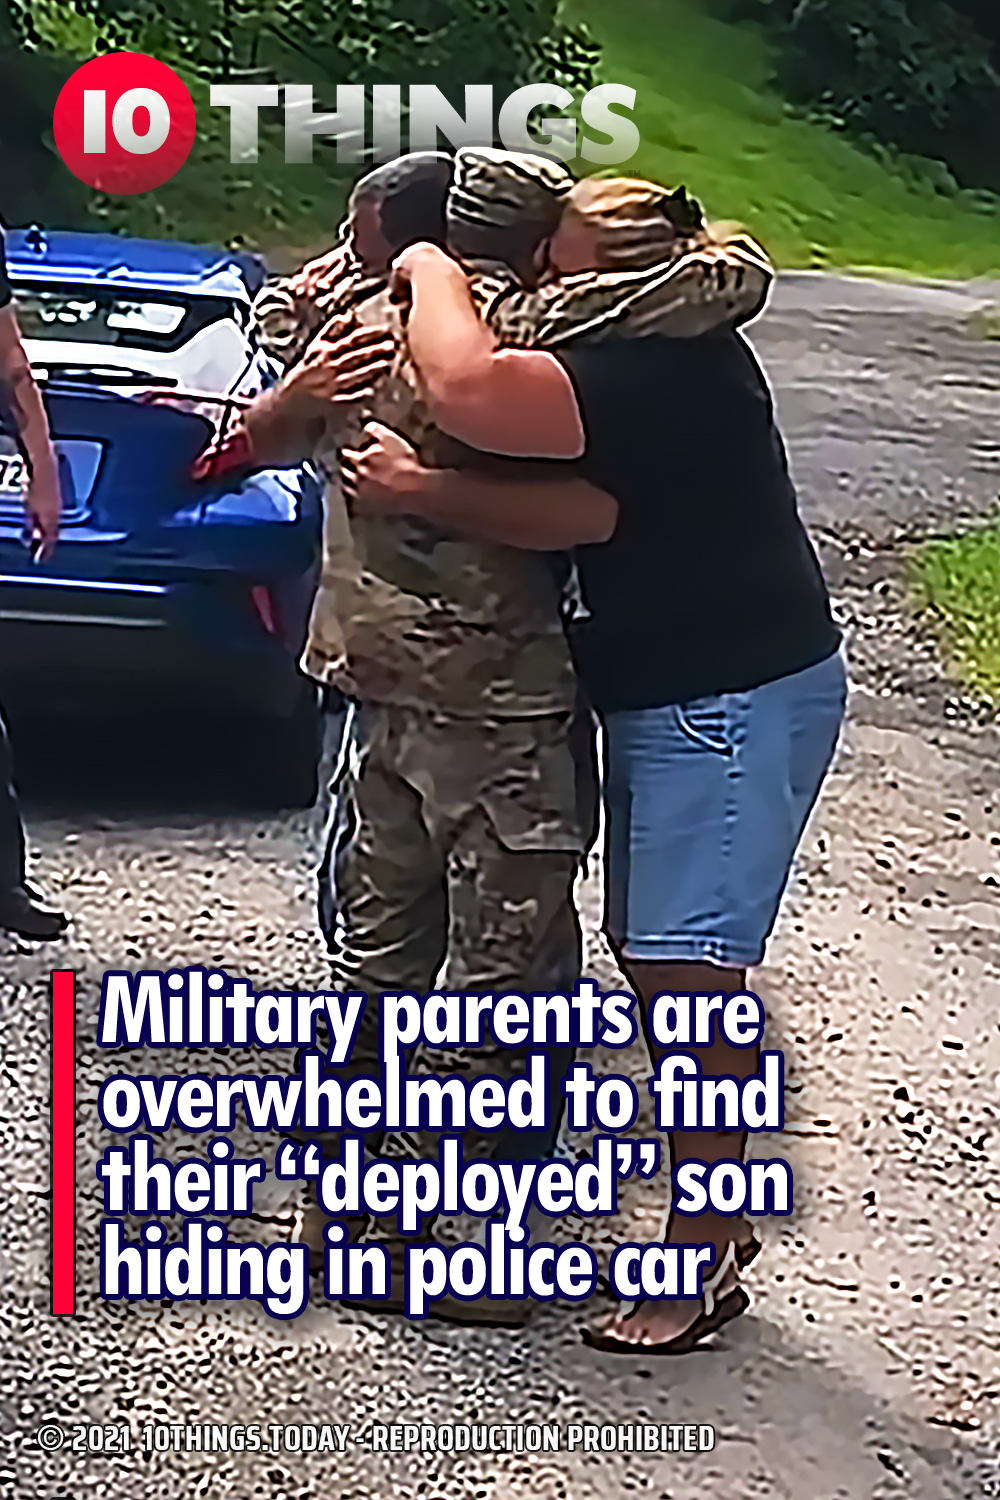 Military parents are overwhelmed to find their “deployed” son hiding in police car